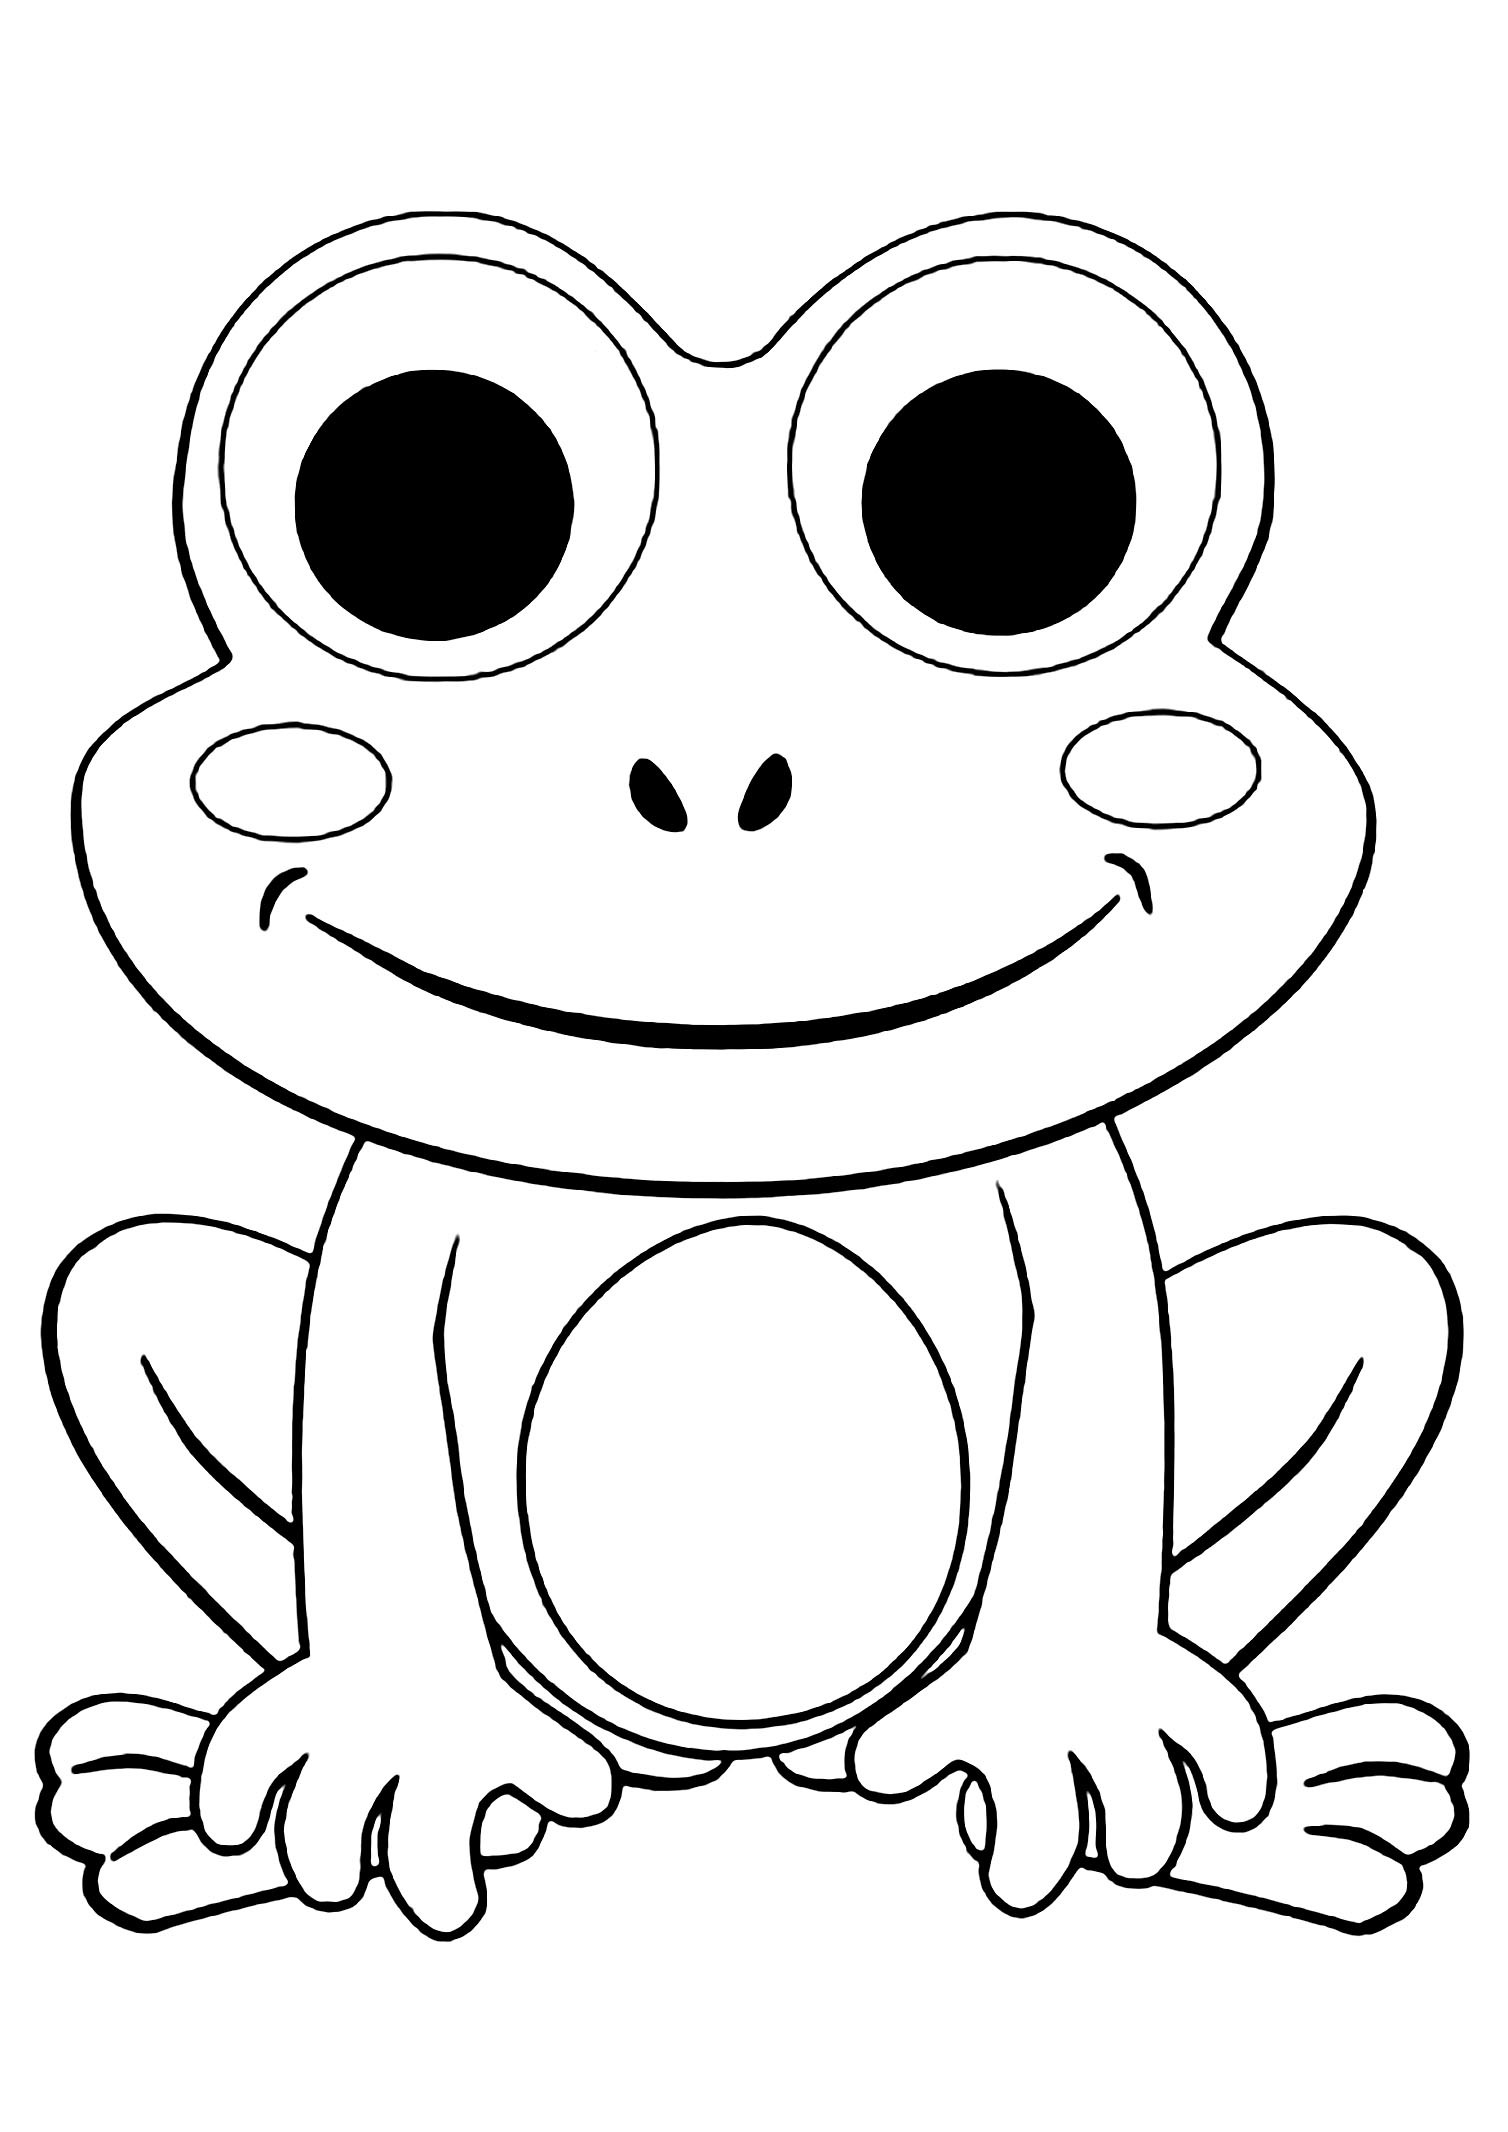 Frog Coloring Pages For Kids
 Frogs to print for free Frogs Kids Coloring Pages